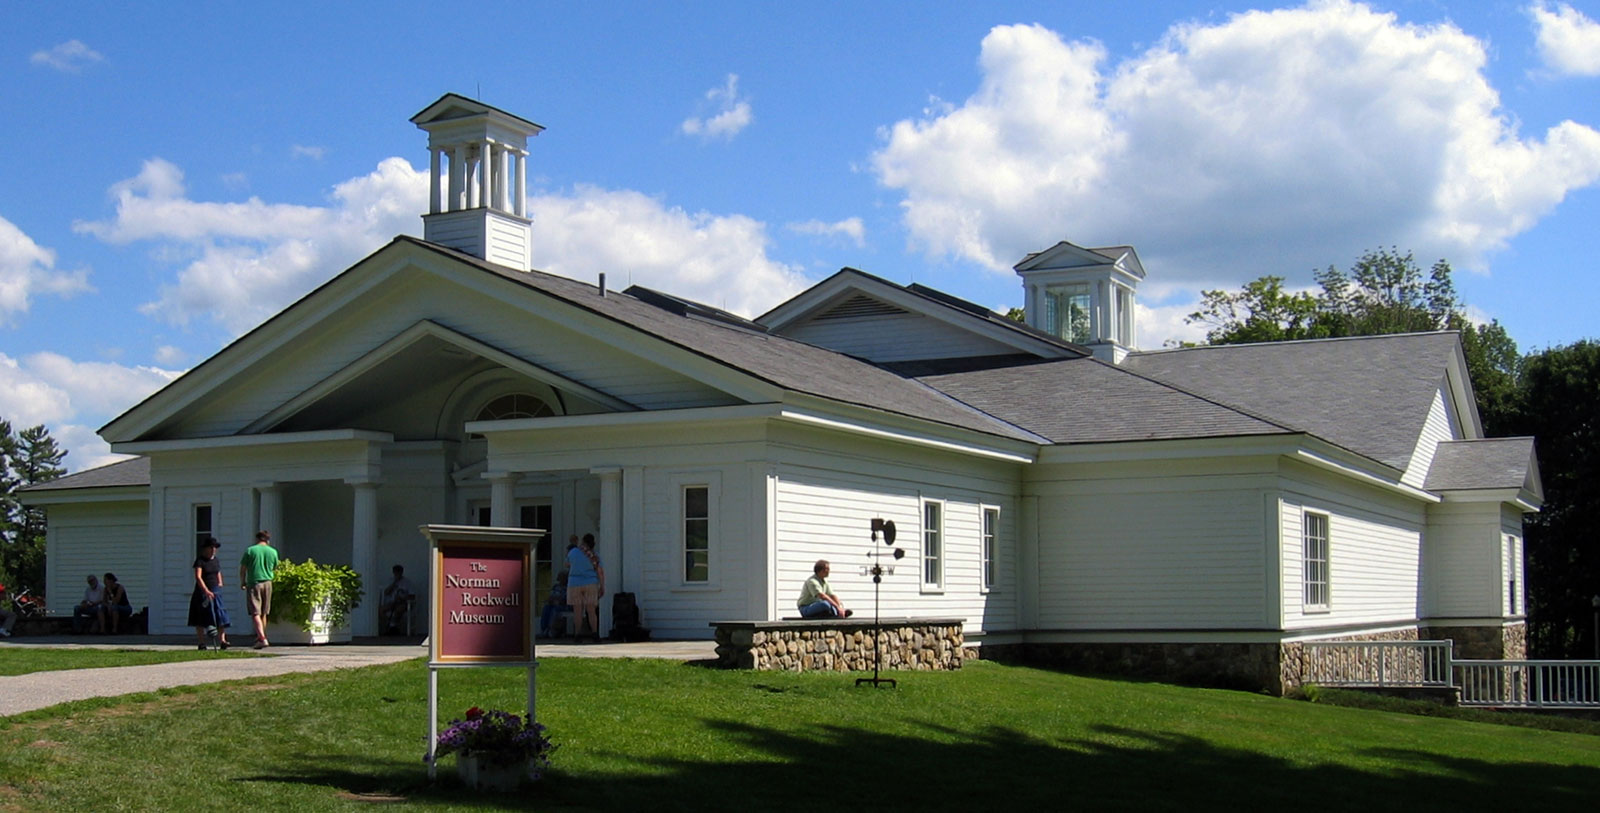 Experience the Norman Rockwell Museum.